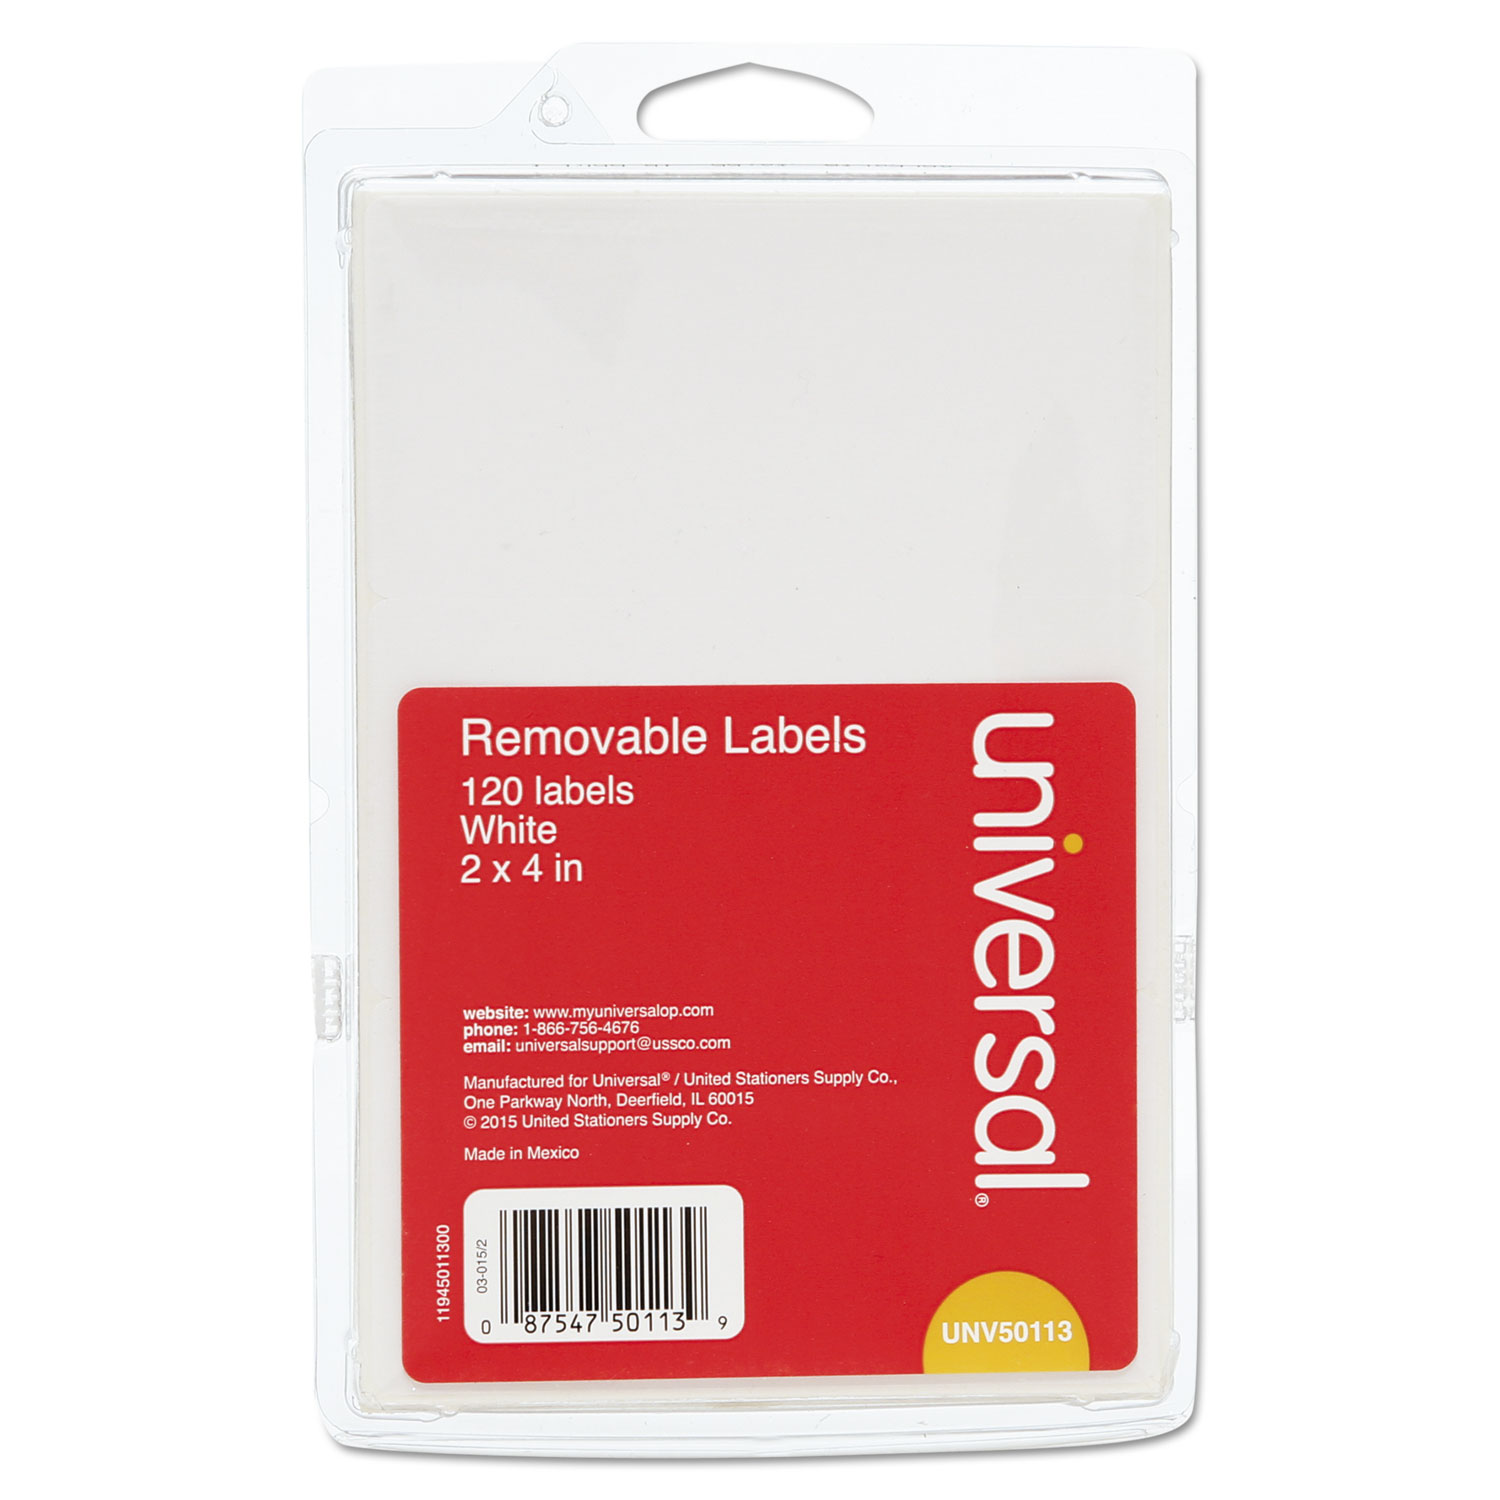  Universal UNV50113 Self-Adhesive Removable ID Labels, 2 x 4, White, 3/Sheet, 40 Sheets/Pack (UNV50113) 